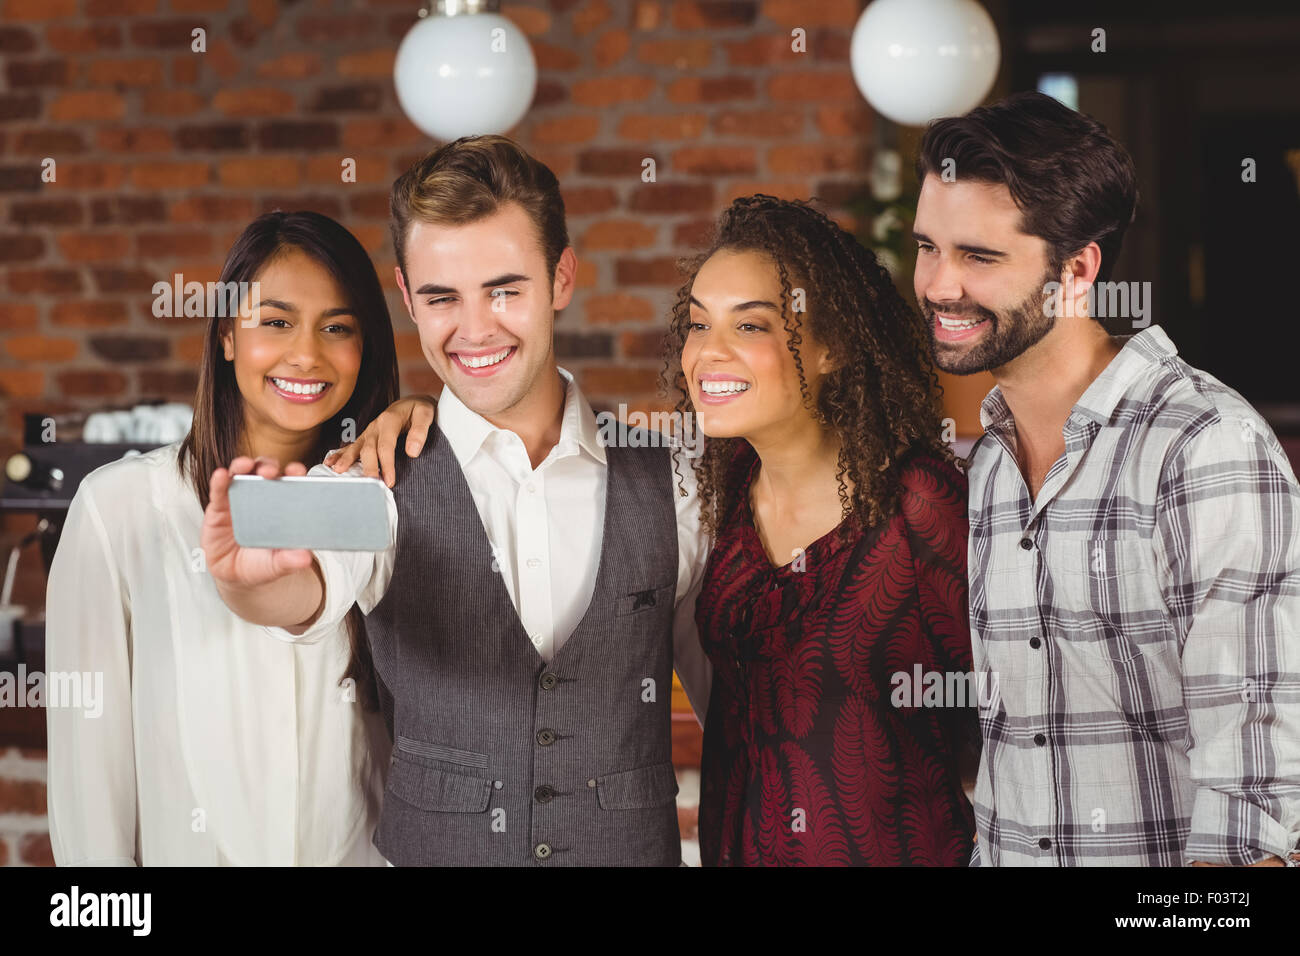 Smiling friends taking a selfie together Stock Photo